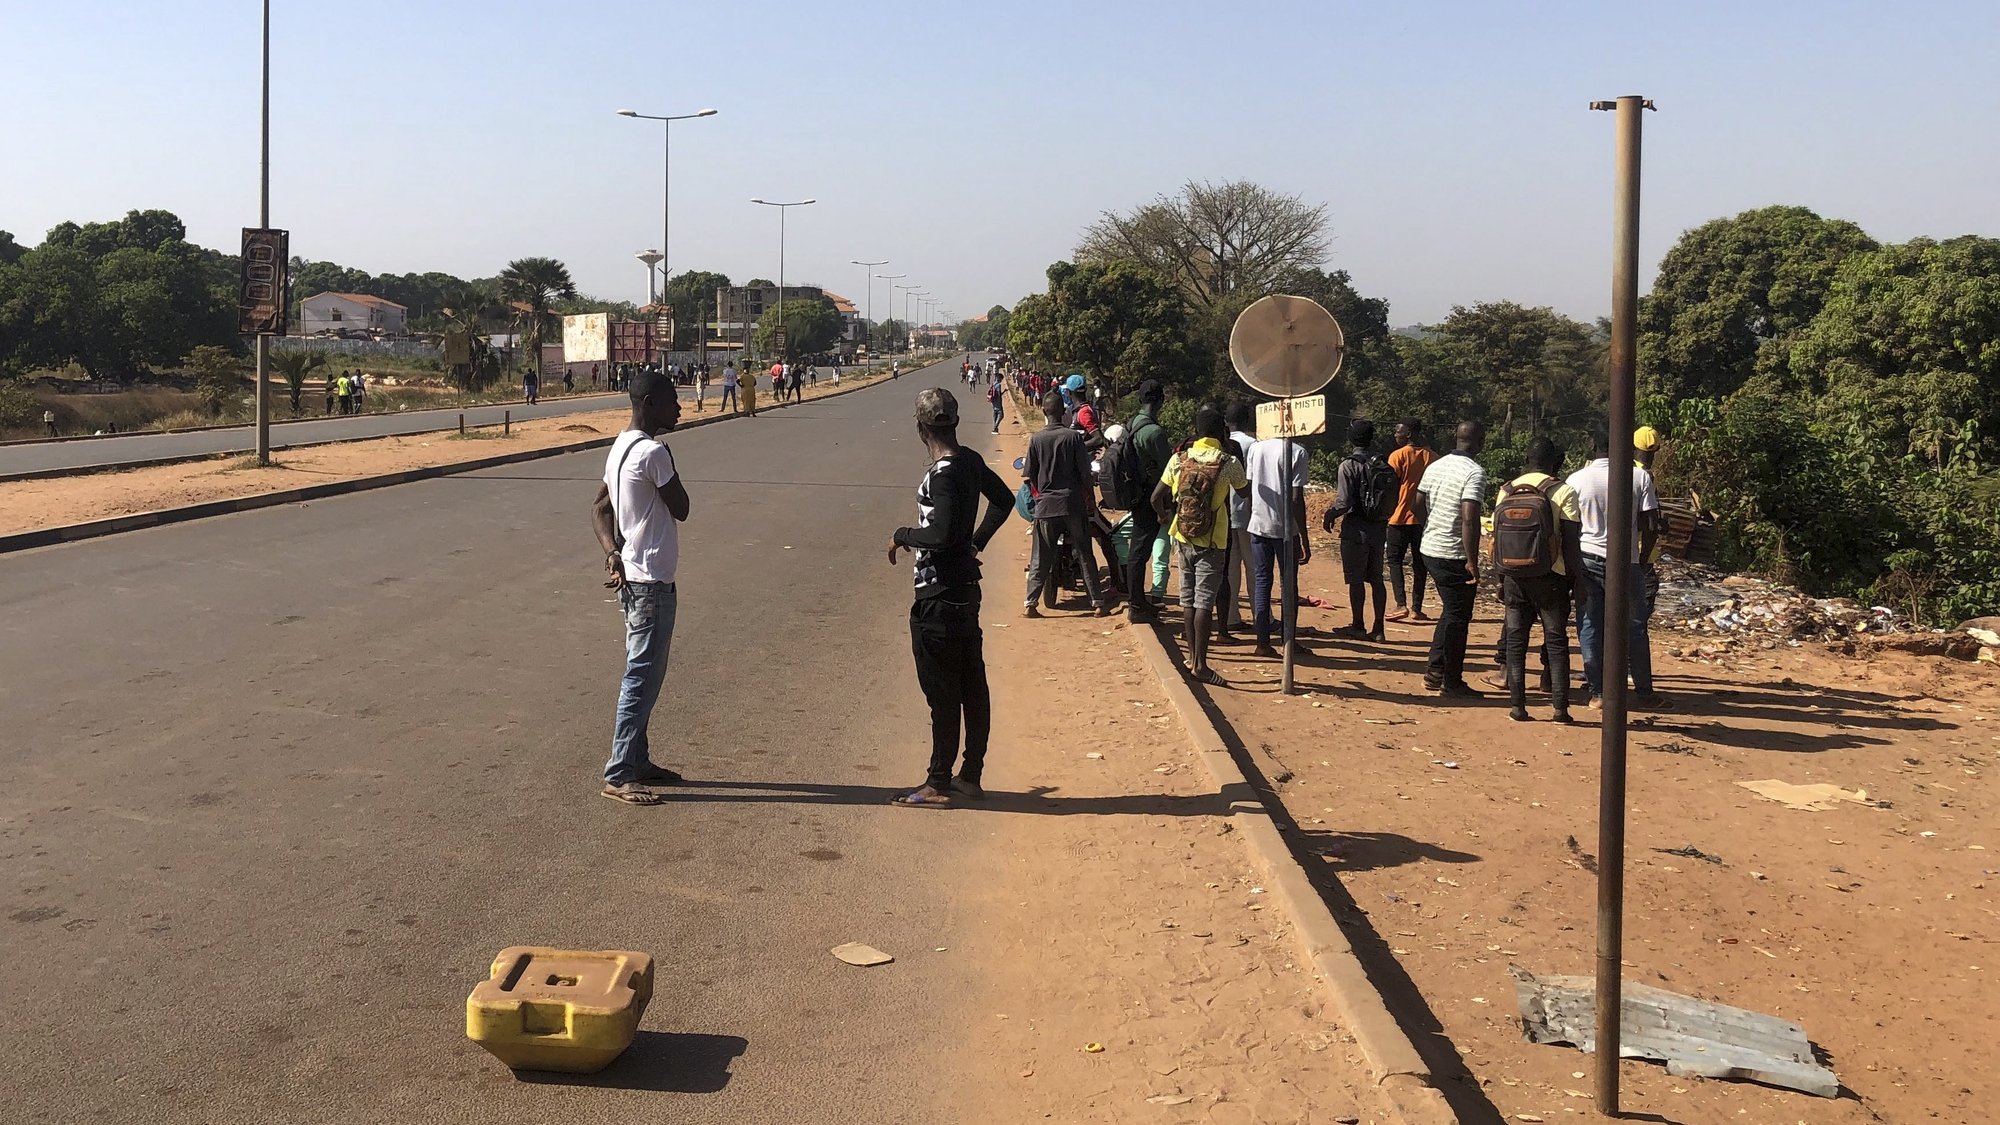 epa09721449 Several shots were heard near the Guinea-Bissau government palace at 15:00 on 01 February, and the military has set up a security perimeter around the area and is not allowing civilians to pass, Bissau, Guinea-Bissau, 01 February 2022. Since lunchtime, bazooka shots and bursts of machine-gun fire have been heard near the palace of the government of Guinea-Bissau, where a cabinet meeting was taking place, attended by President Umaro Sissoco Embalo, and the Prime Minister, Nuno Nabiam.  EPA/ANTONIO AMARAL